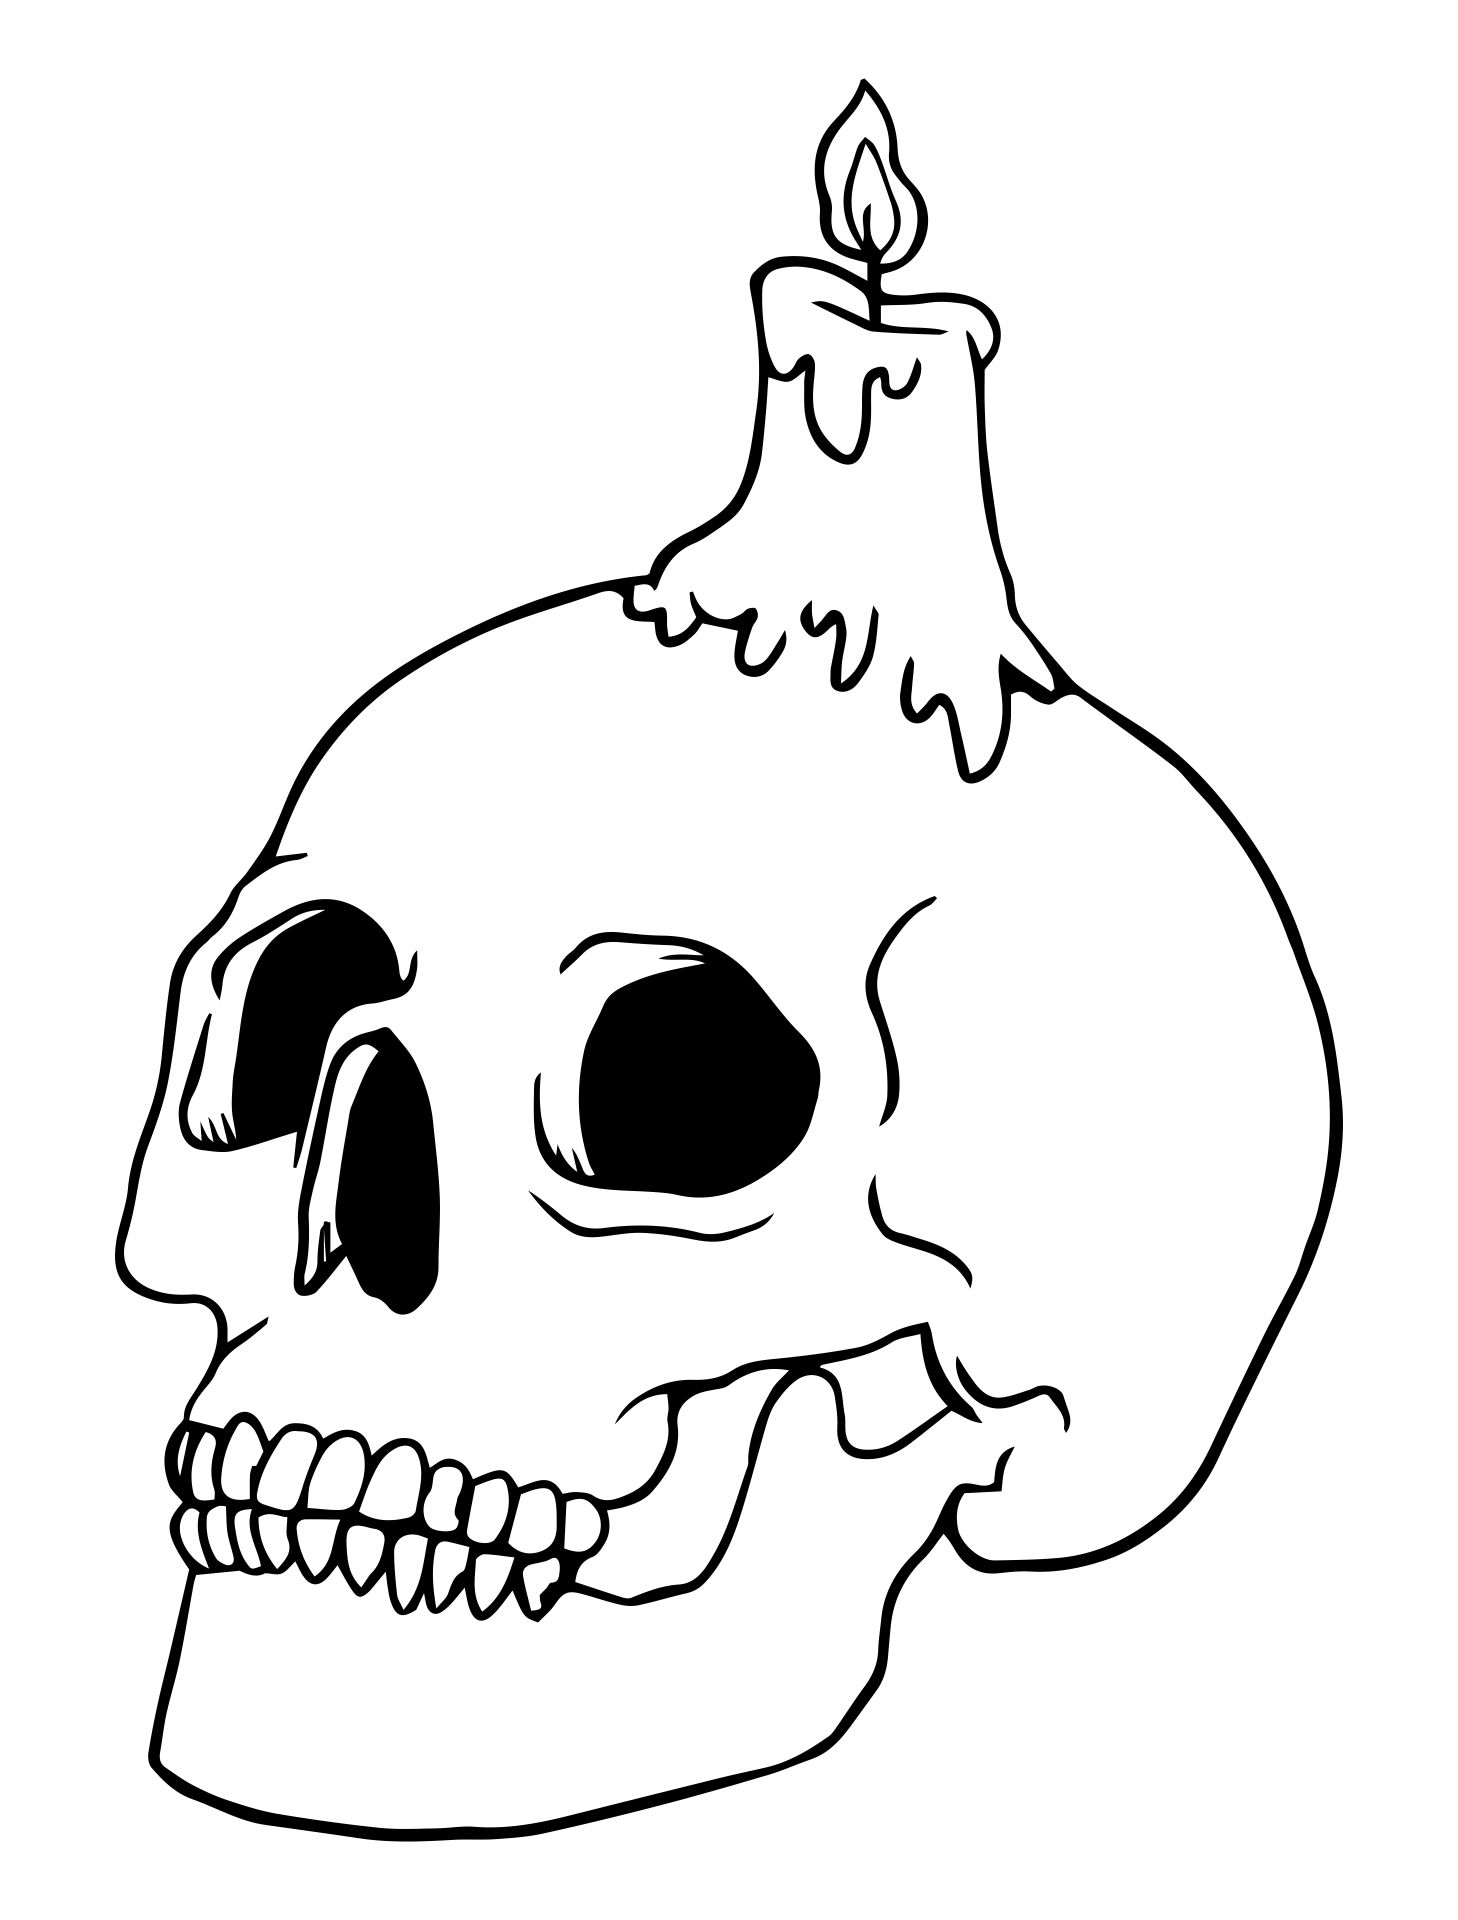 Skull Halloween Coloring Pages